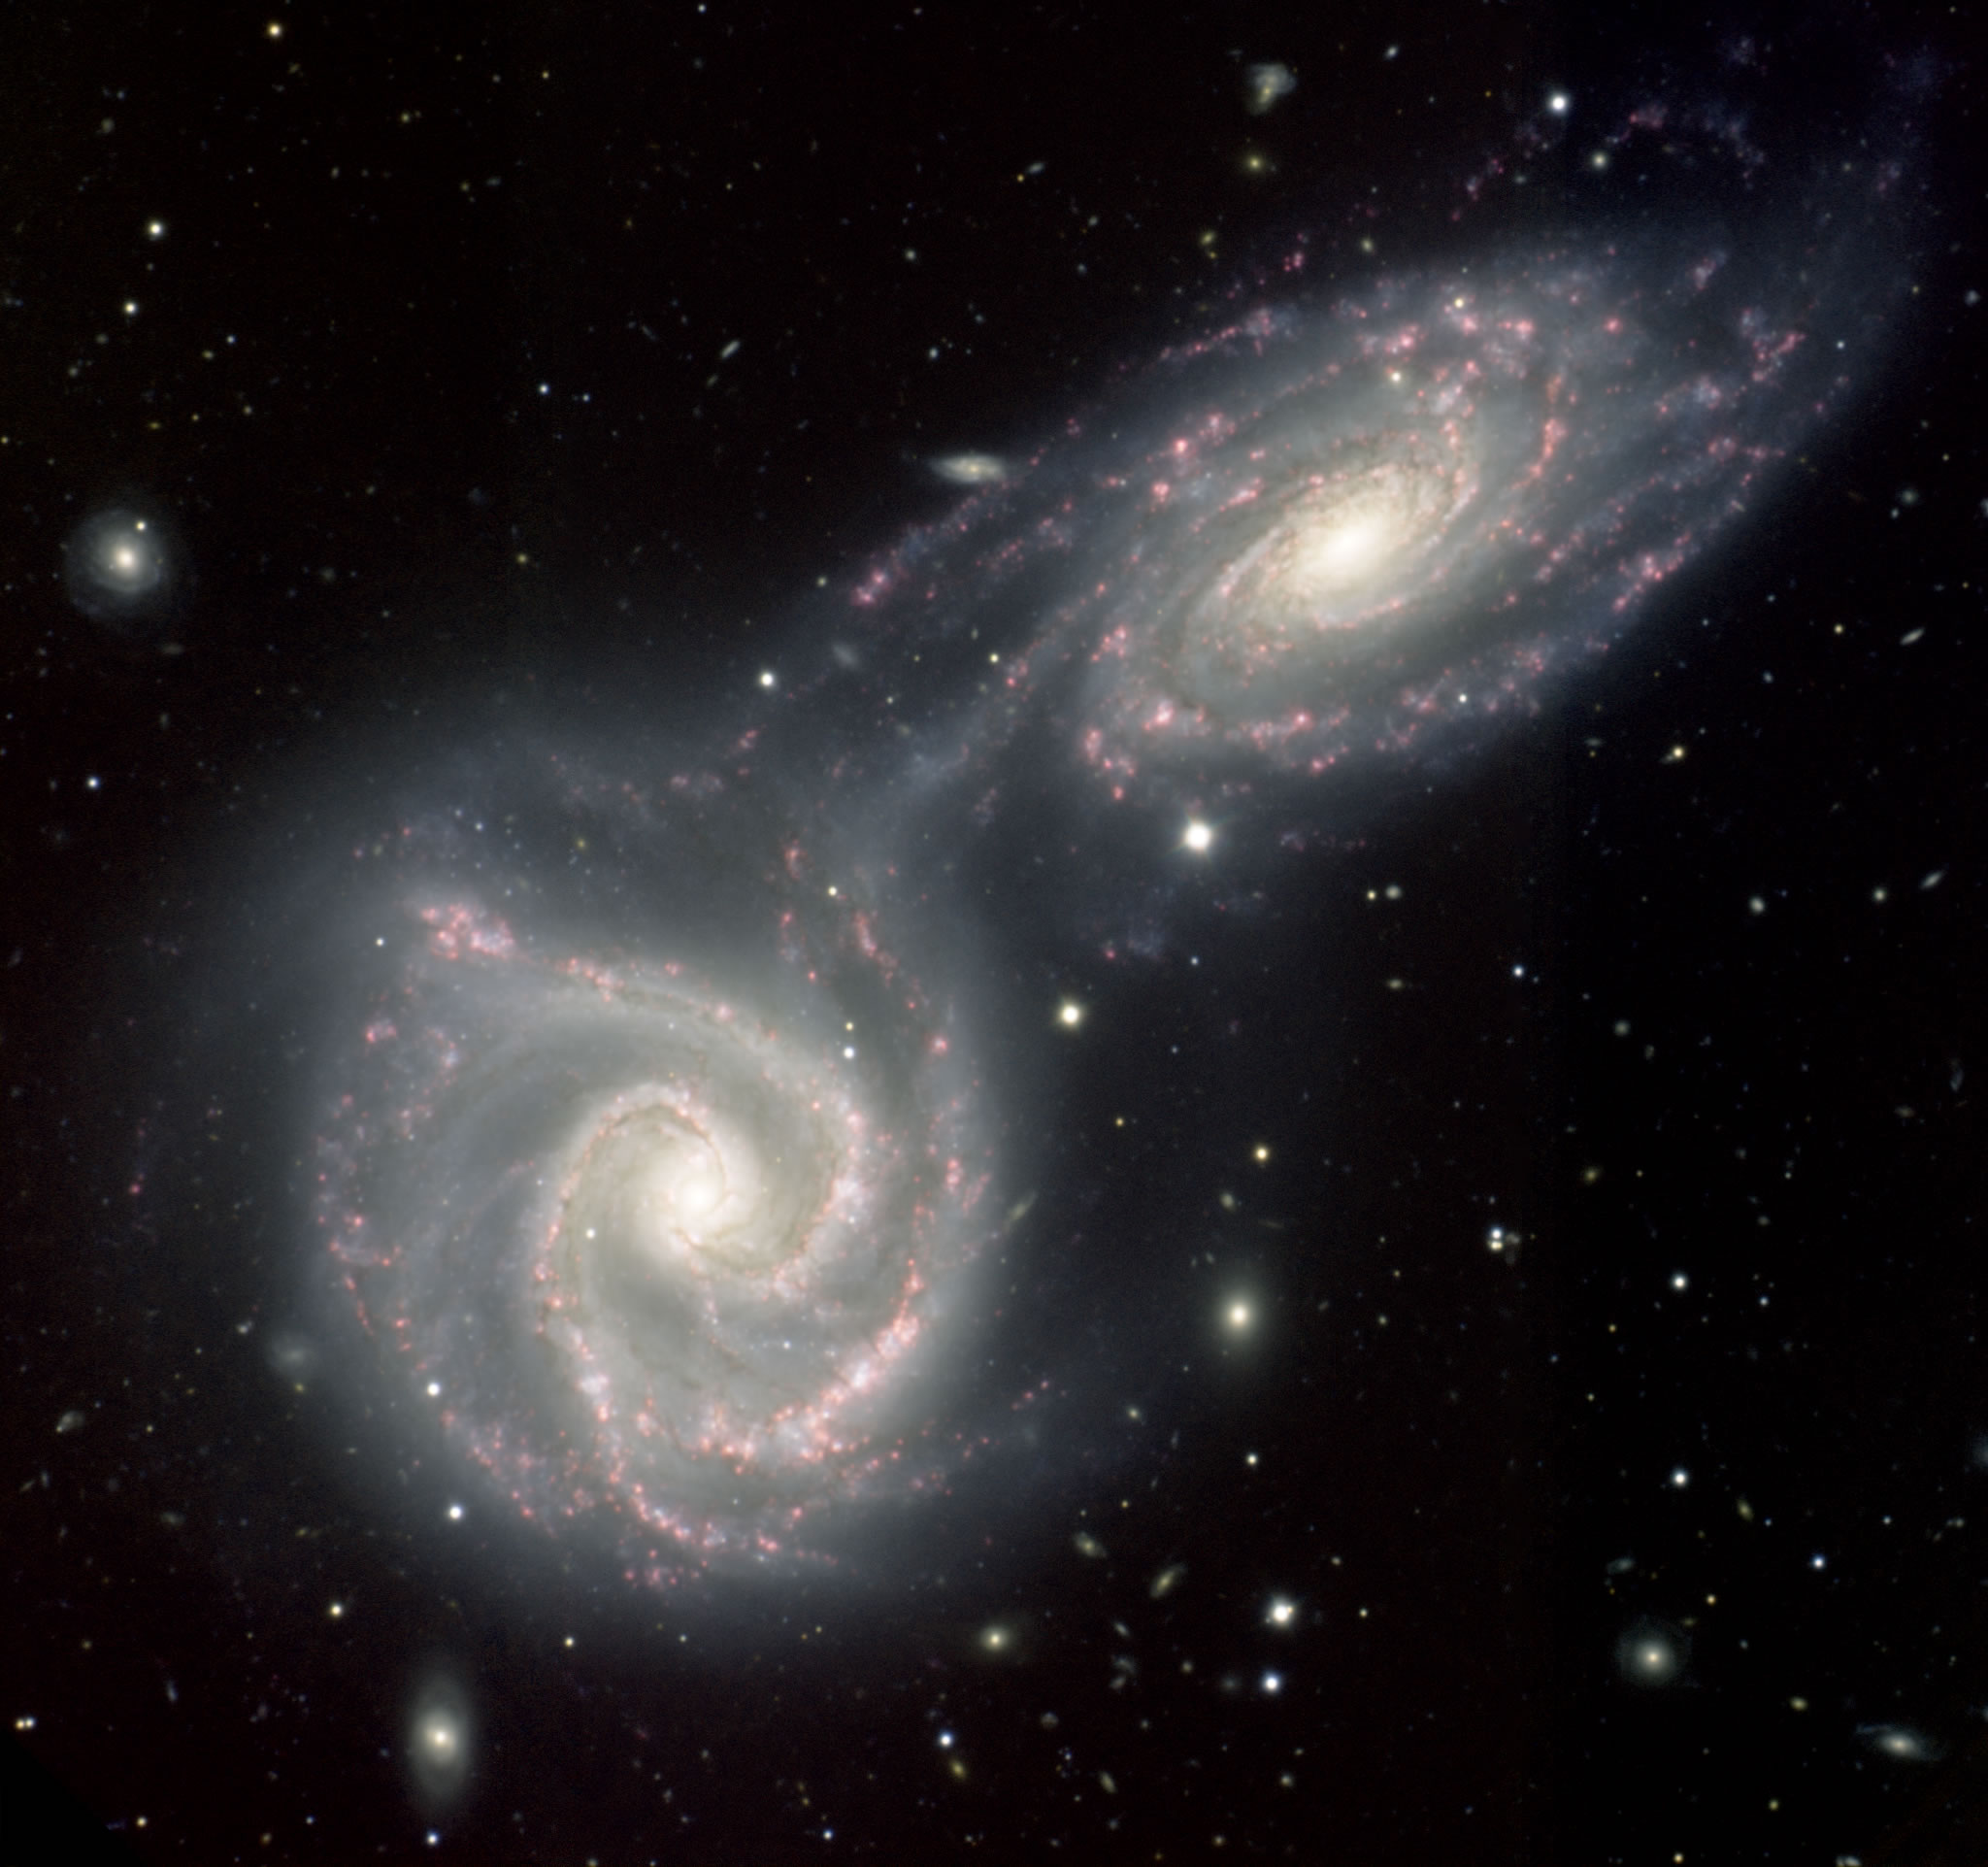 APOD: 2013 August 25 - The Colliding Spiral Galaxies of Arp 271